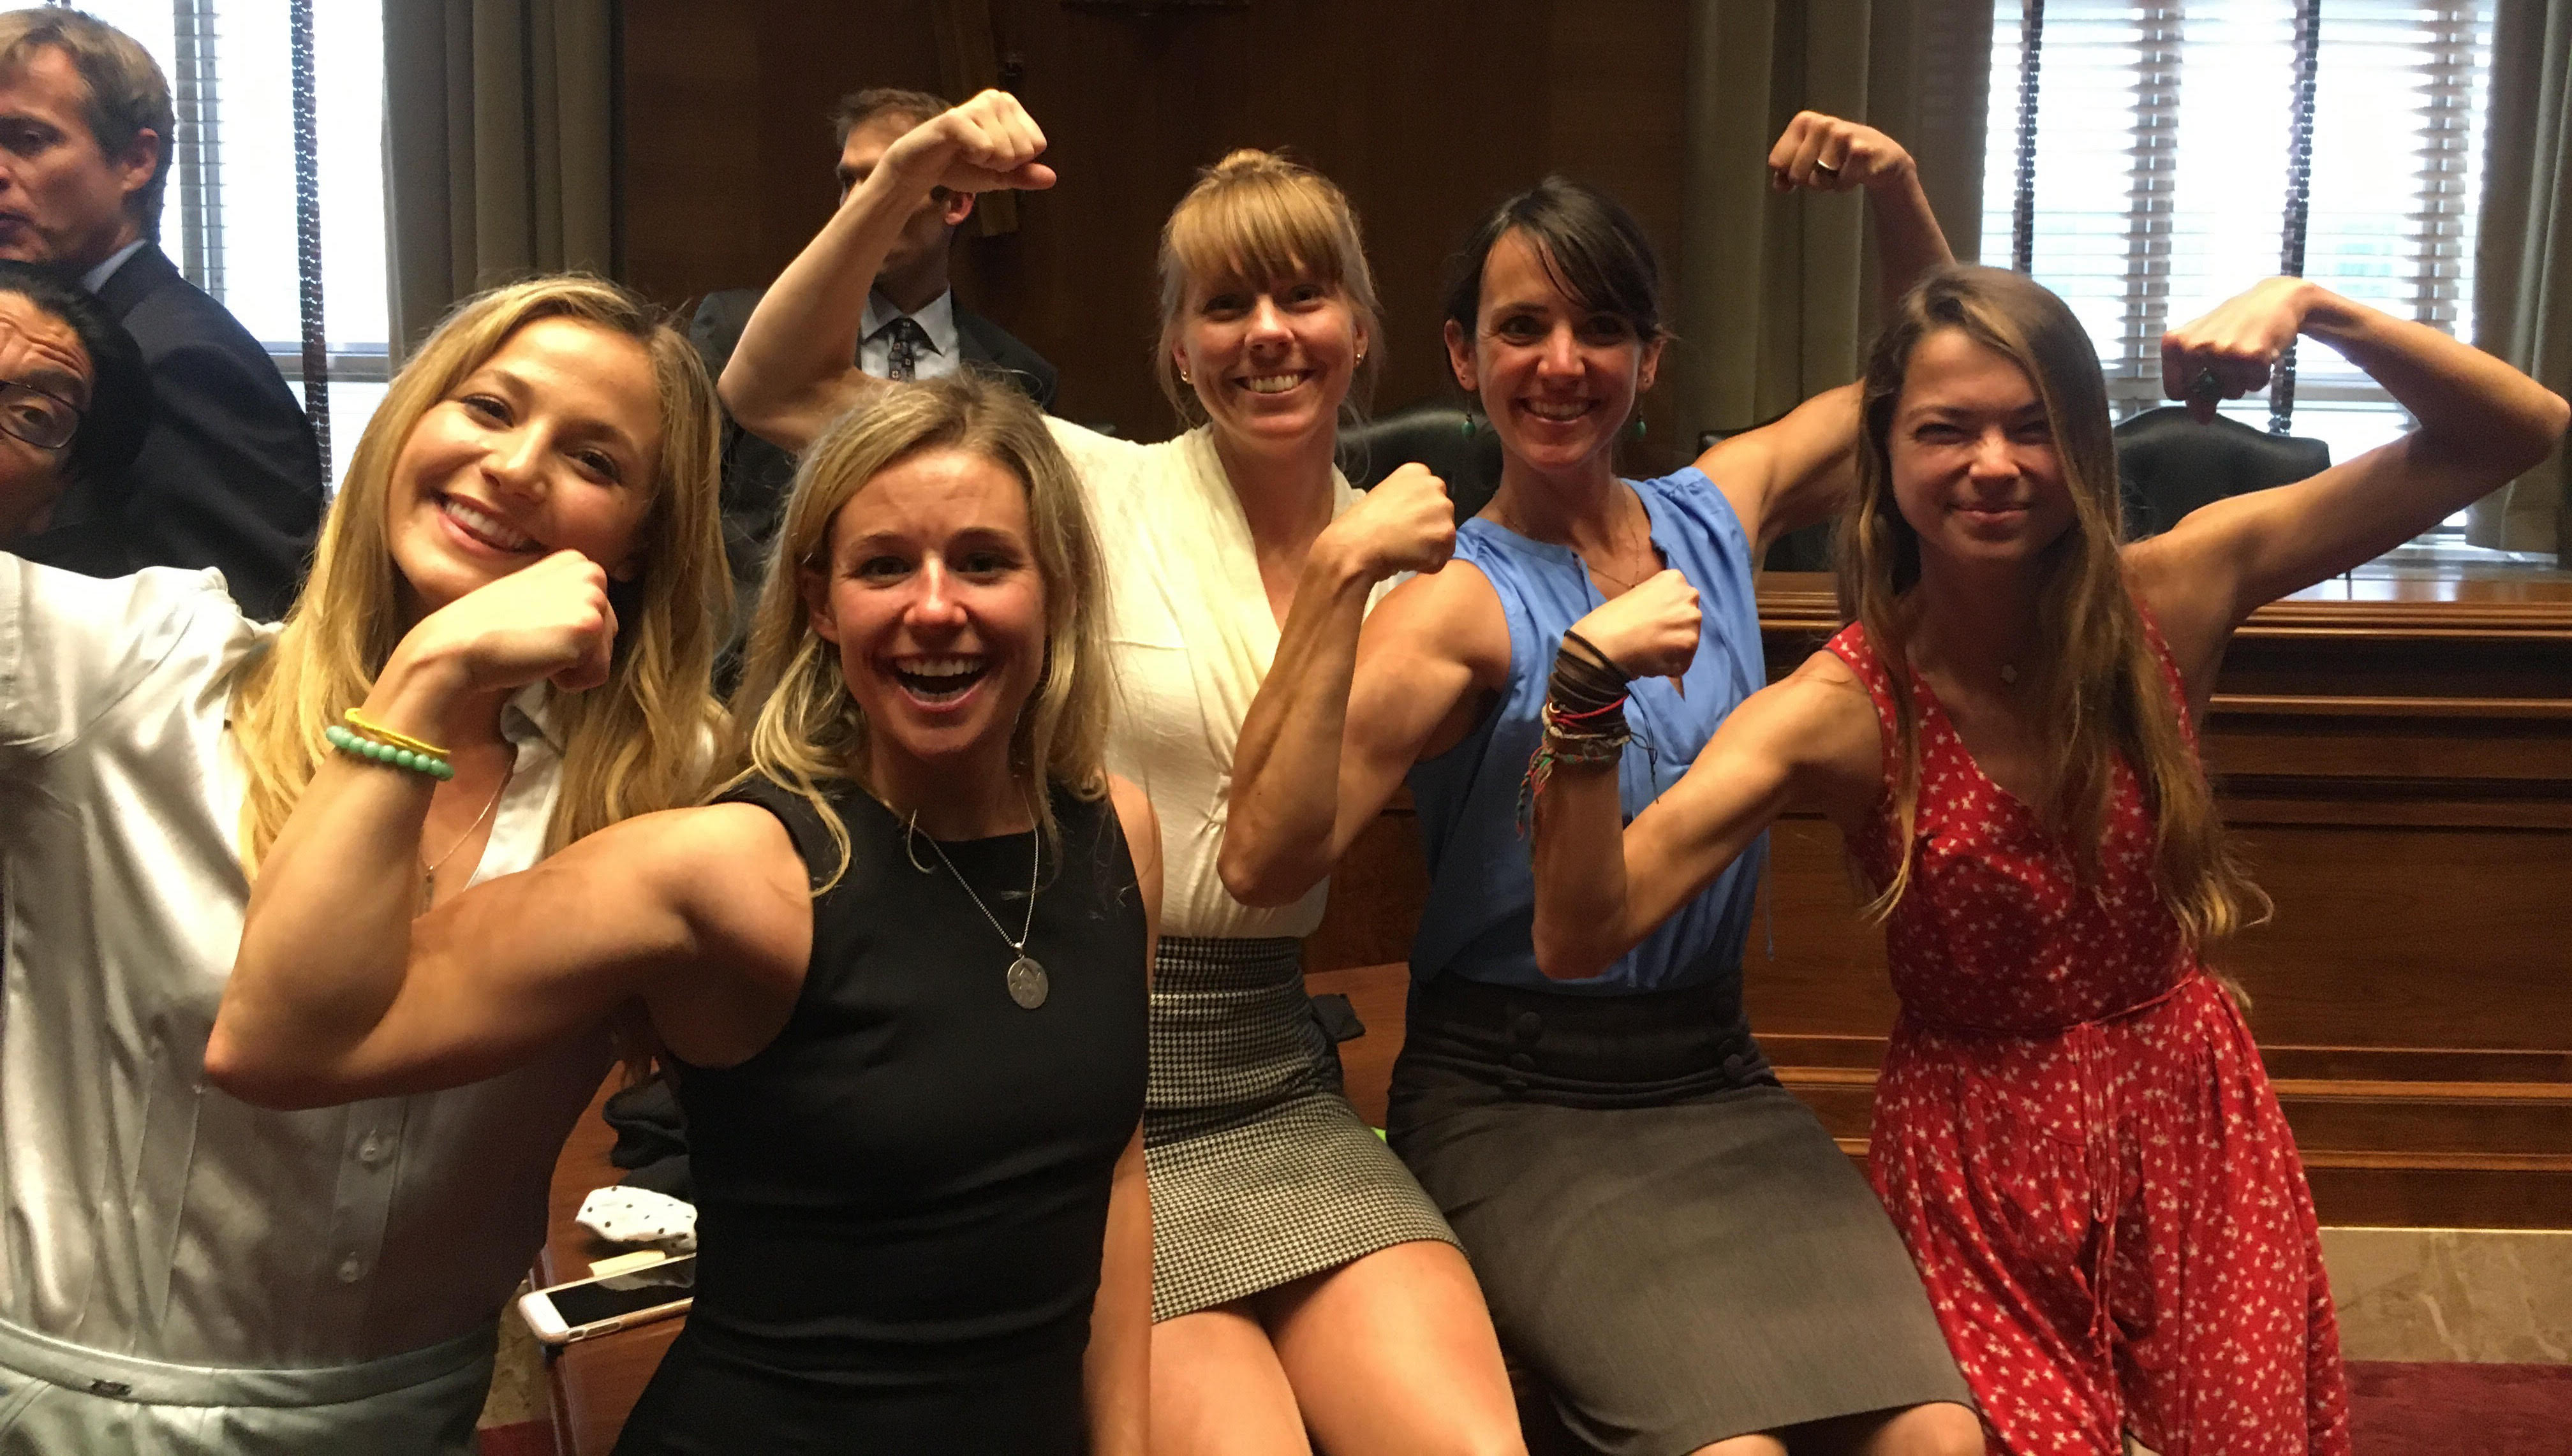 Female climbing representatives display their power after a successful day on Capitol Hill. From left to right are Sasha DiGiulian, Caroline Gleich, Libby Sauter, Quinn Brett and Katie Boue. [Photo] Derek Franz